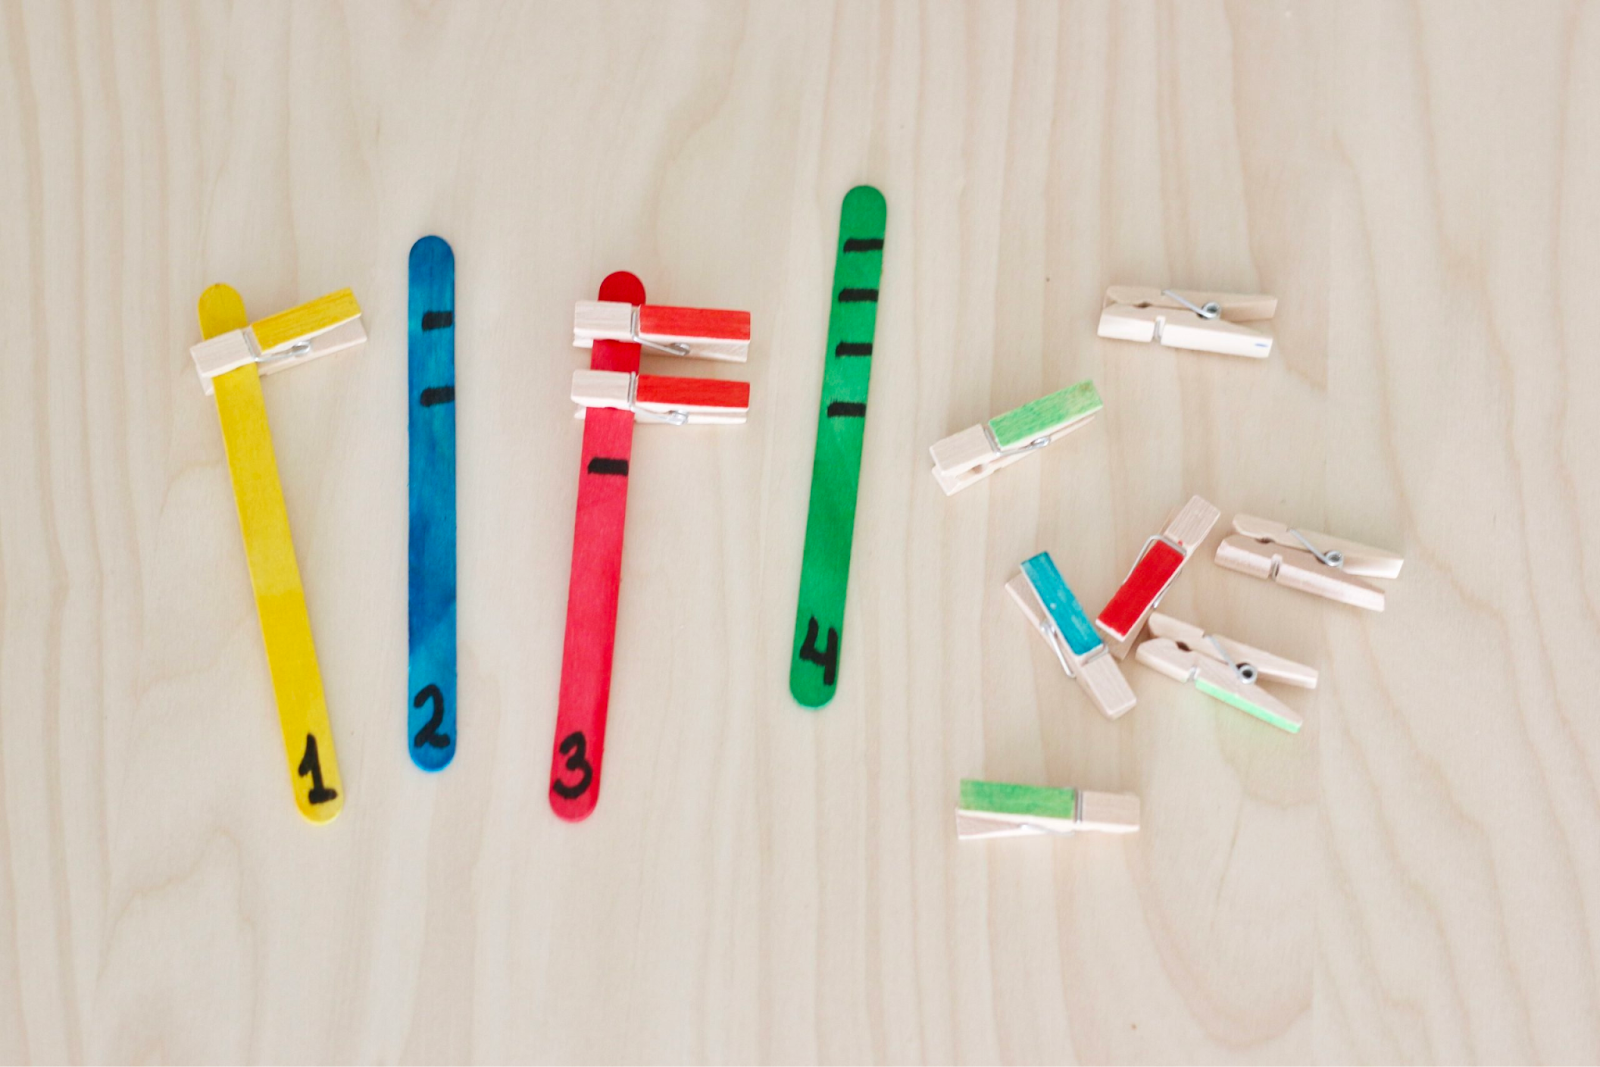 Four popsicle sticks: the first painted yellow, with the number 1 at the bottom; the second painted blue, with the number 2 at the bottom; the third painted red, with the number 3 at the bottom; and the fourth painted green, with the number 4 at the bottom. There are seven clothespins to the right of the popsicle sticks. 